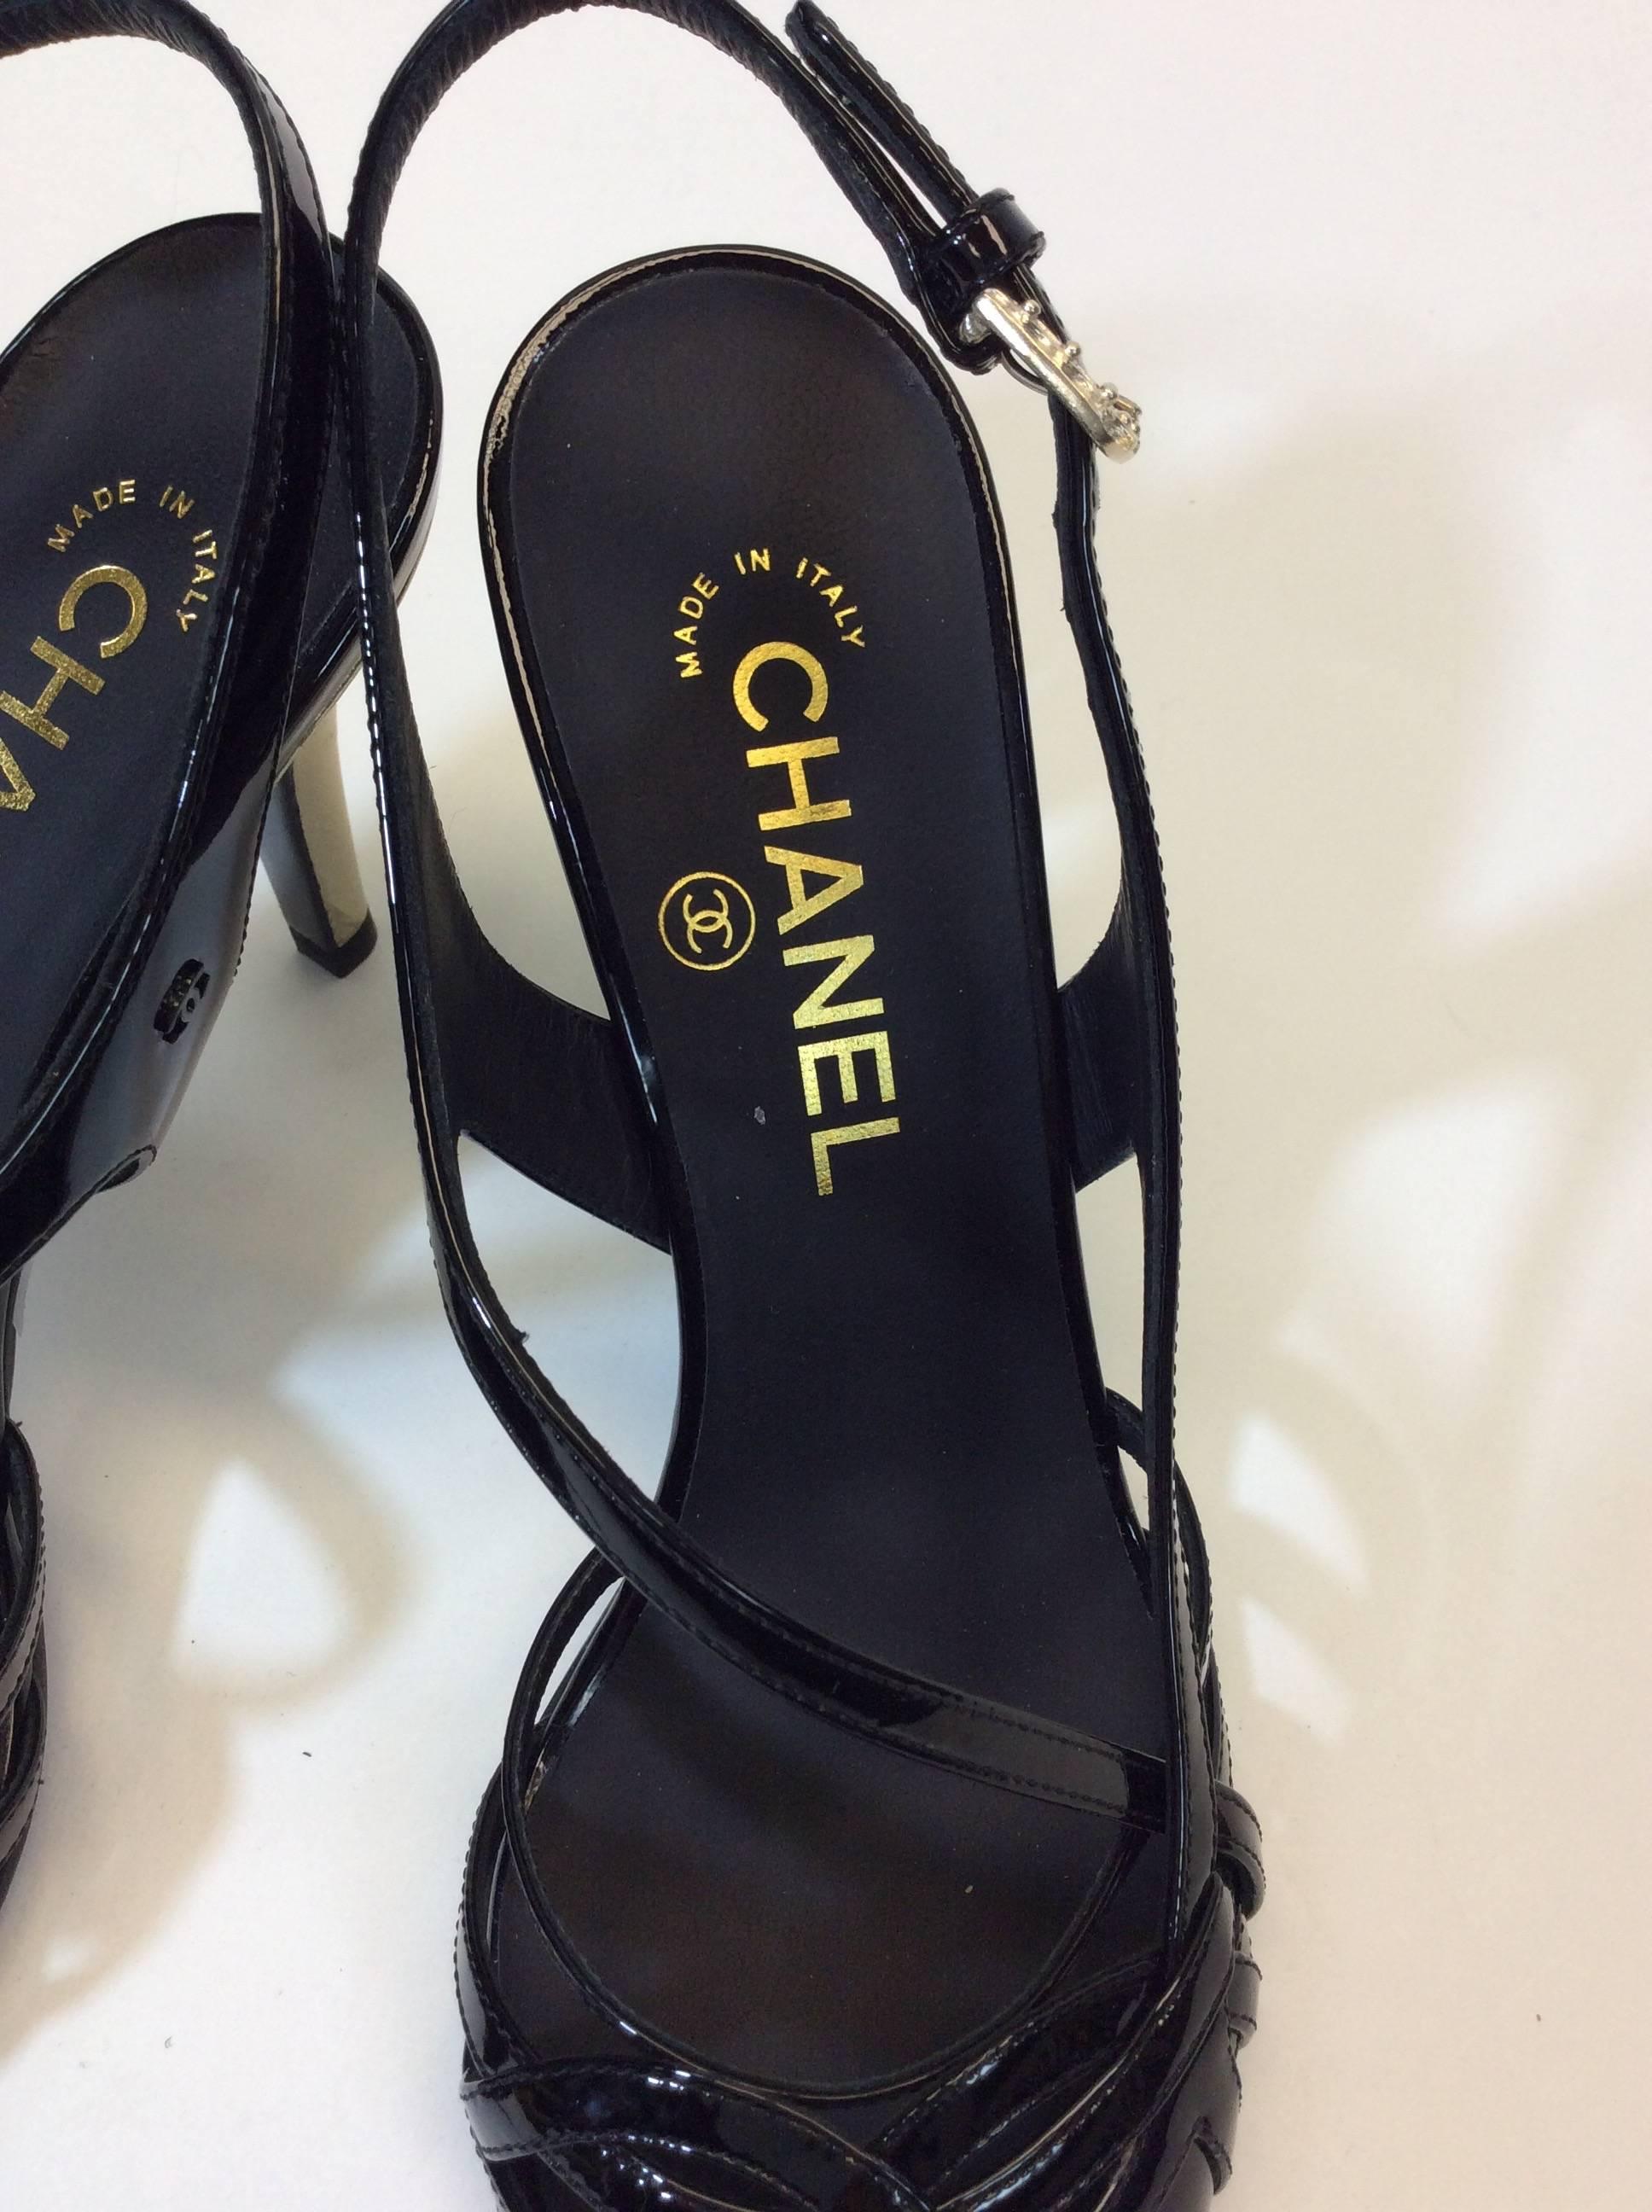 Chanel Black Patent Leather Strap Heel For Sale 4